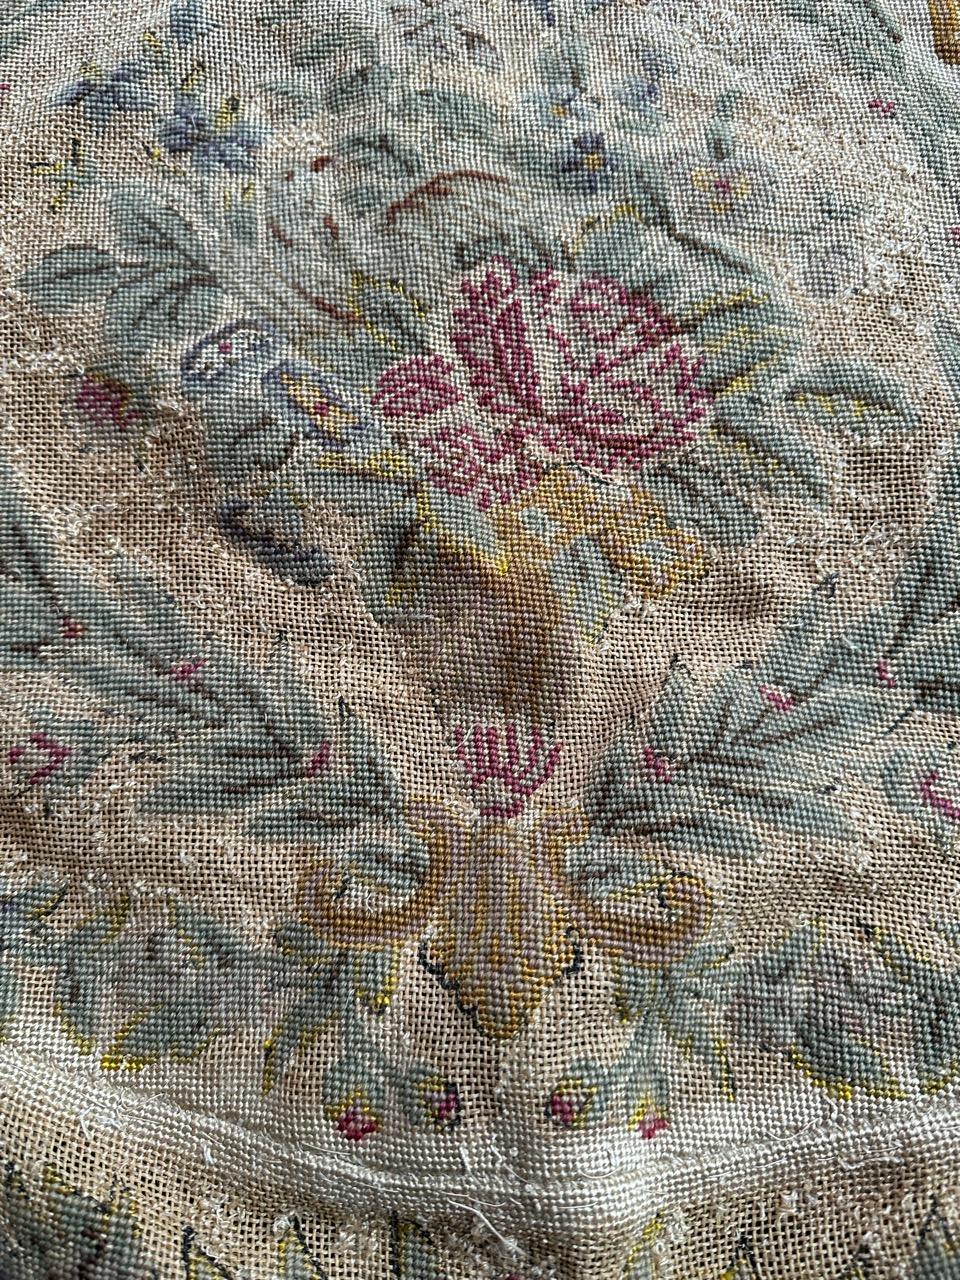 Exquisite late 19th-century French needlepoint tapestry originally from a chair cover but can be also use for cushions, or frames. Adorned with a captivating floral design from the Napoleon III era, this piece showcases vibrant natural colors.